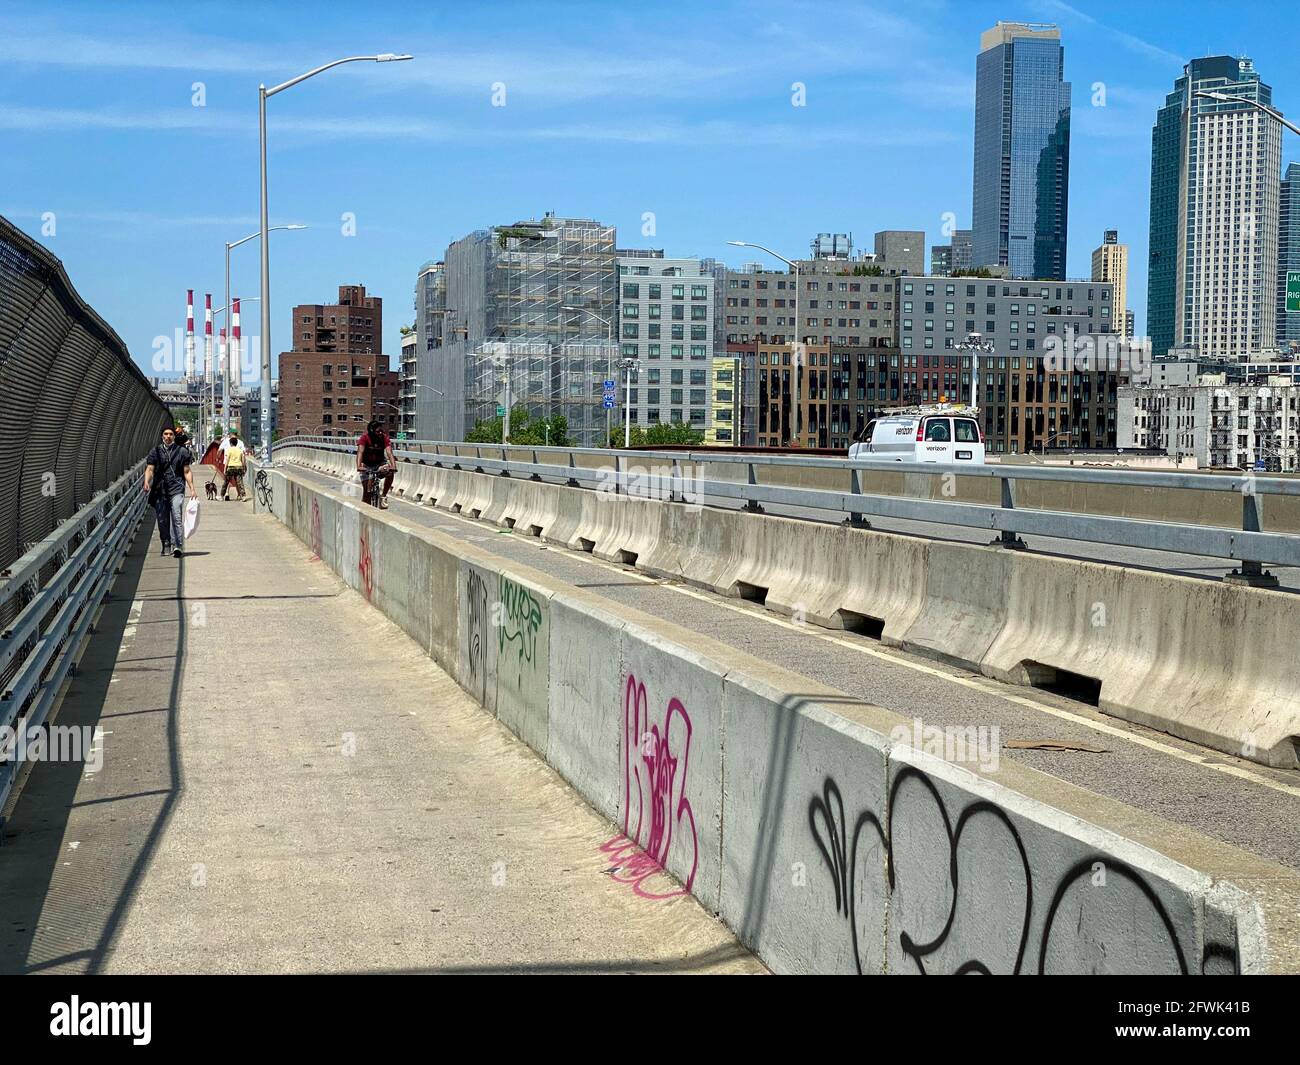 Brooklyn, NY, USA - May 23, 2021: Concrete barriers separating pedestrians, bicyclists and vehicular traffic on Pulaski Bridge Stock Photo